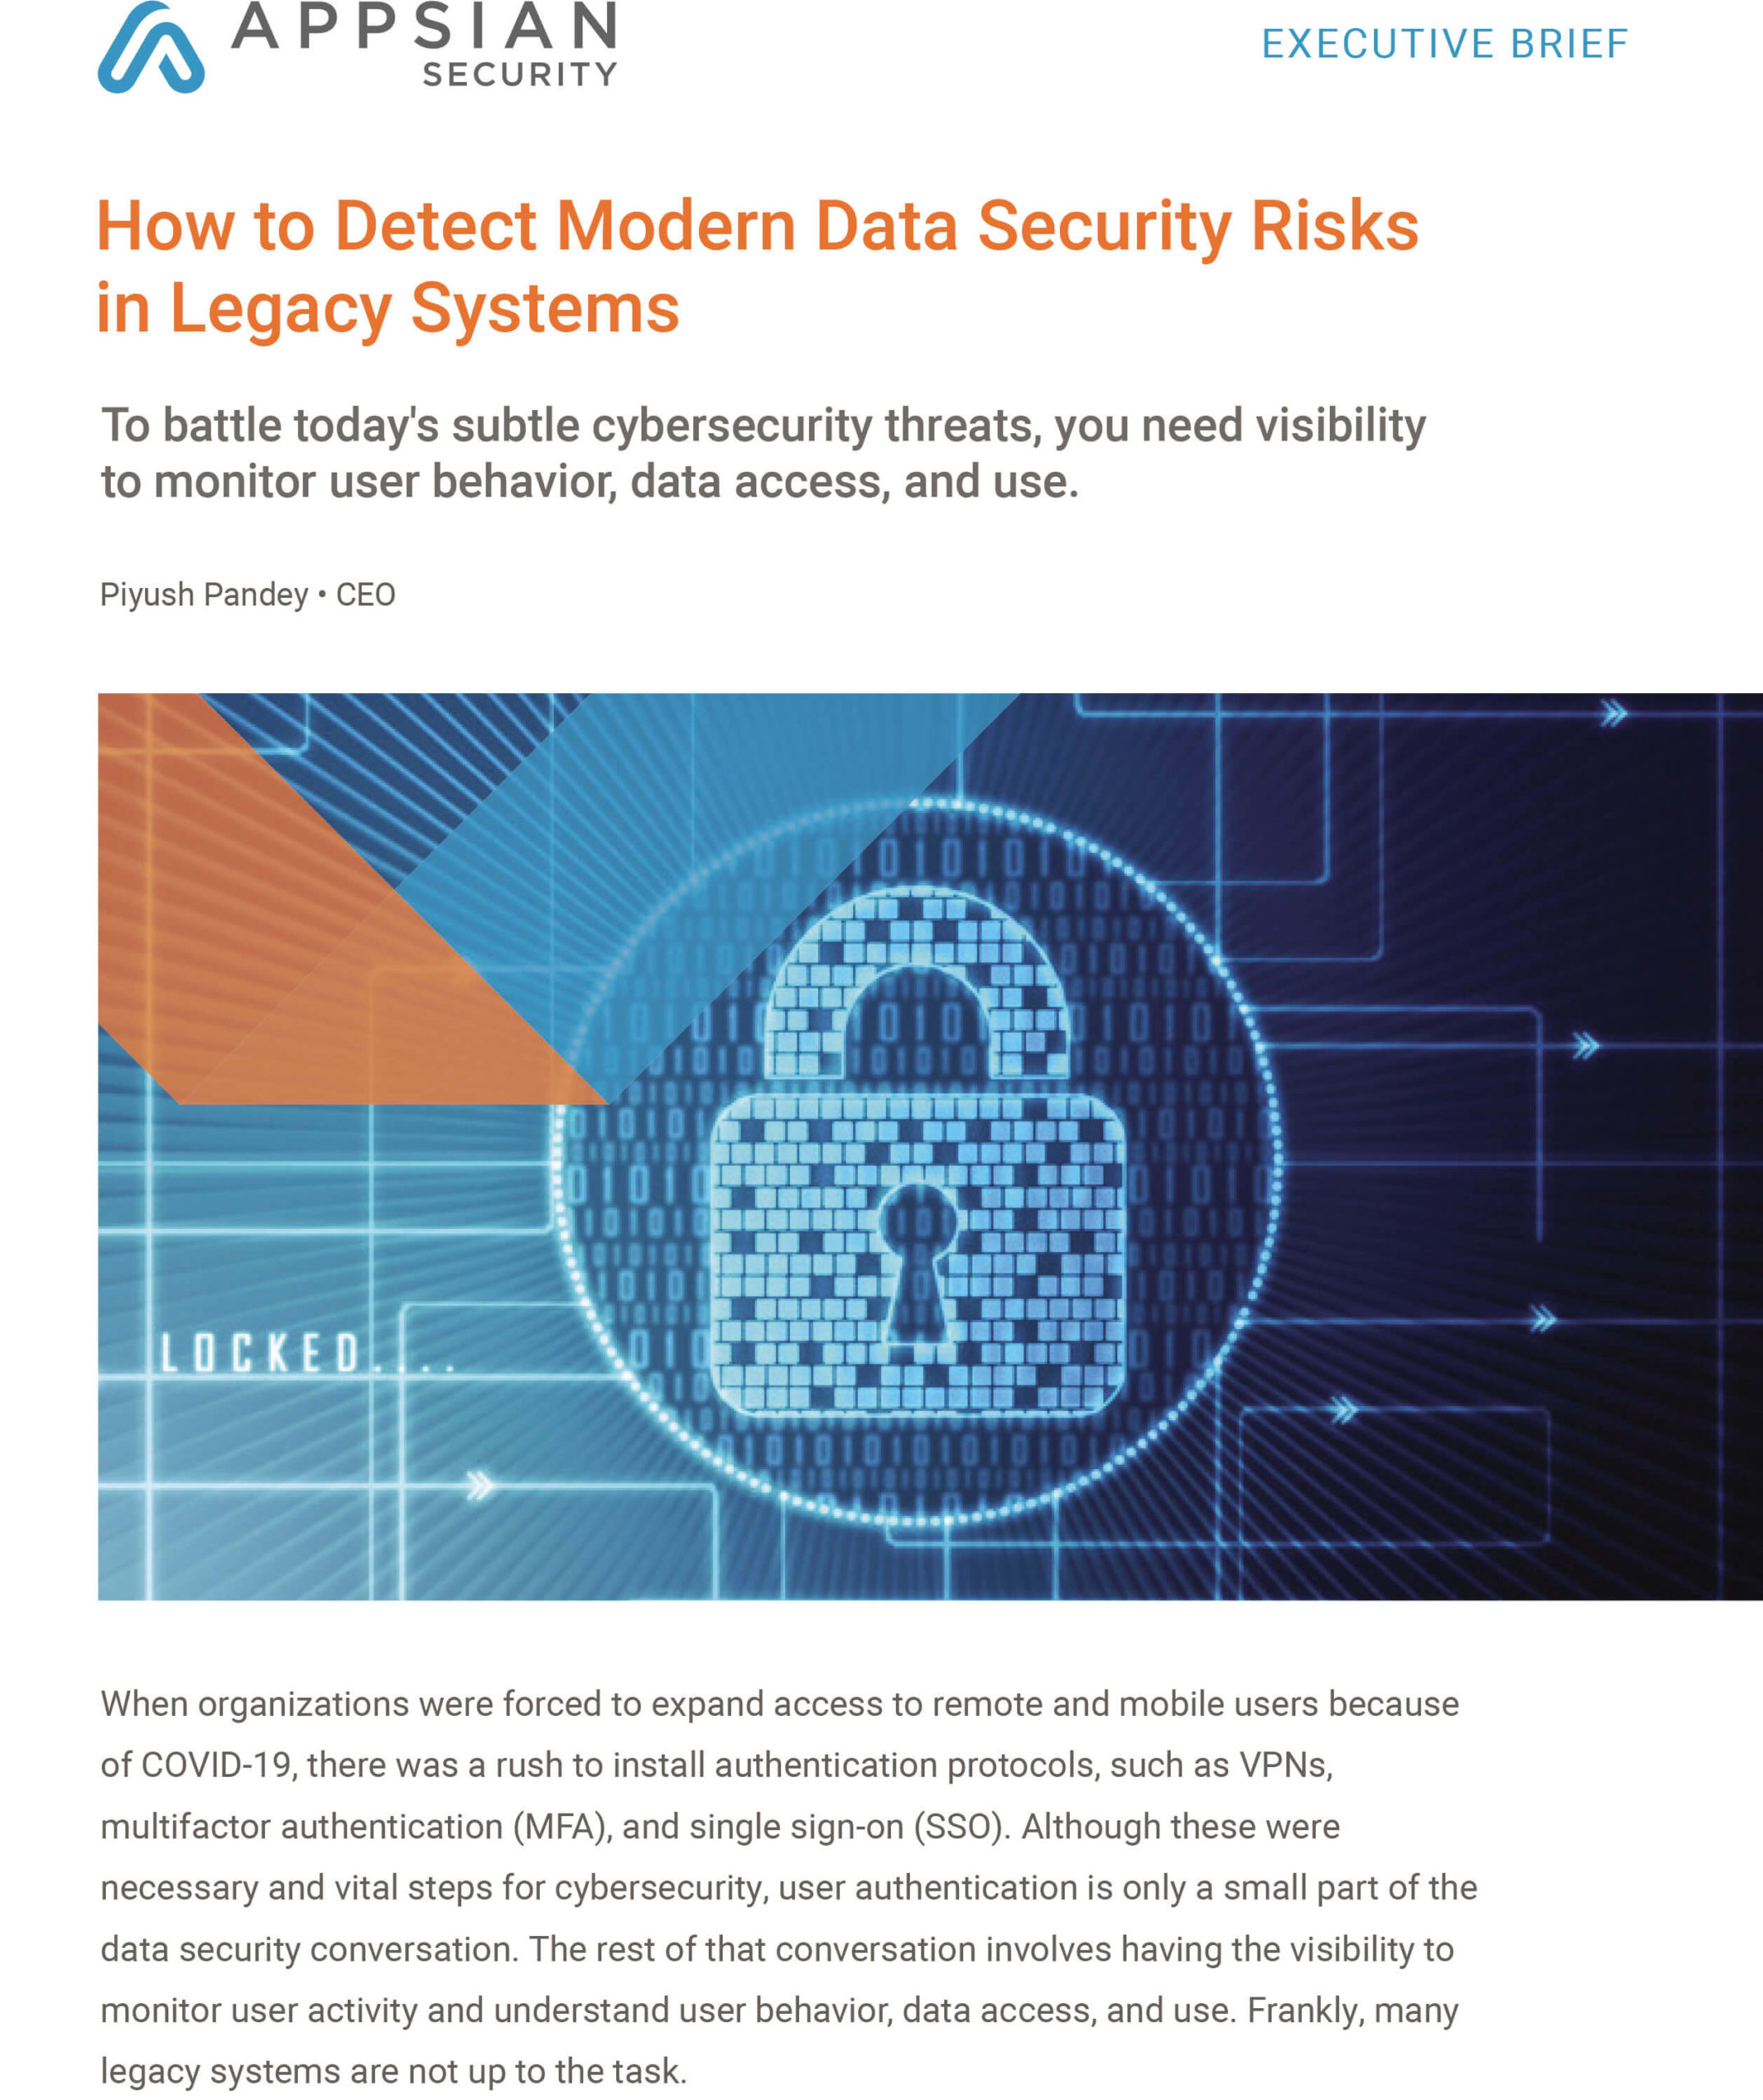 How to Detect Modern Data Security Risks in Legacy Systems